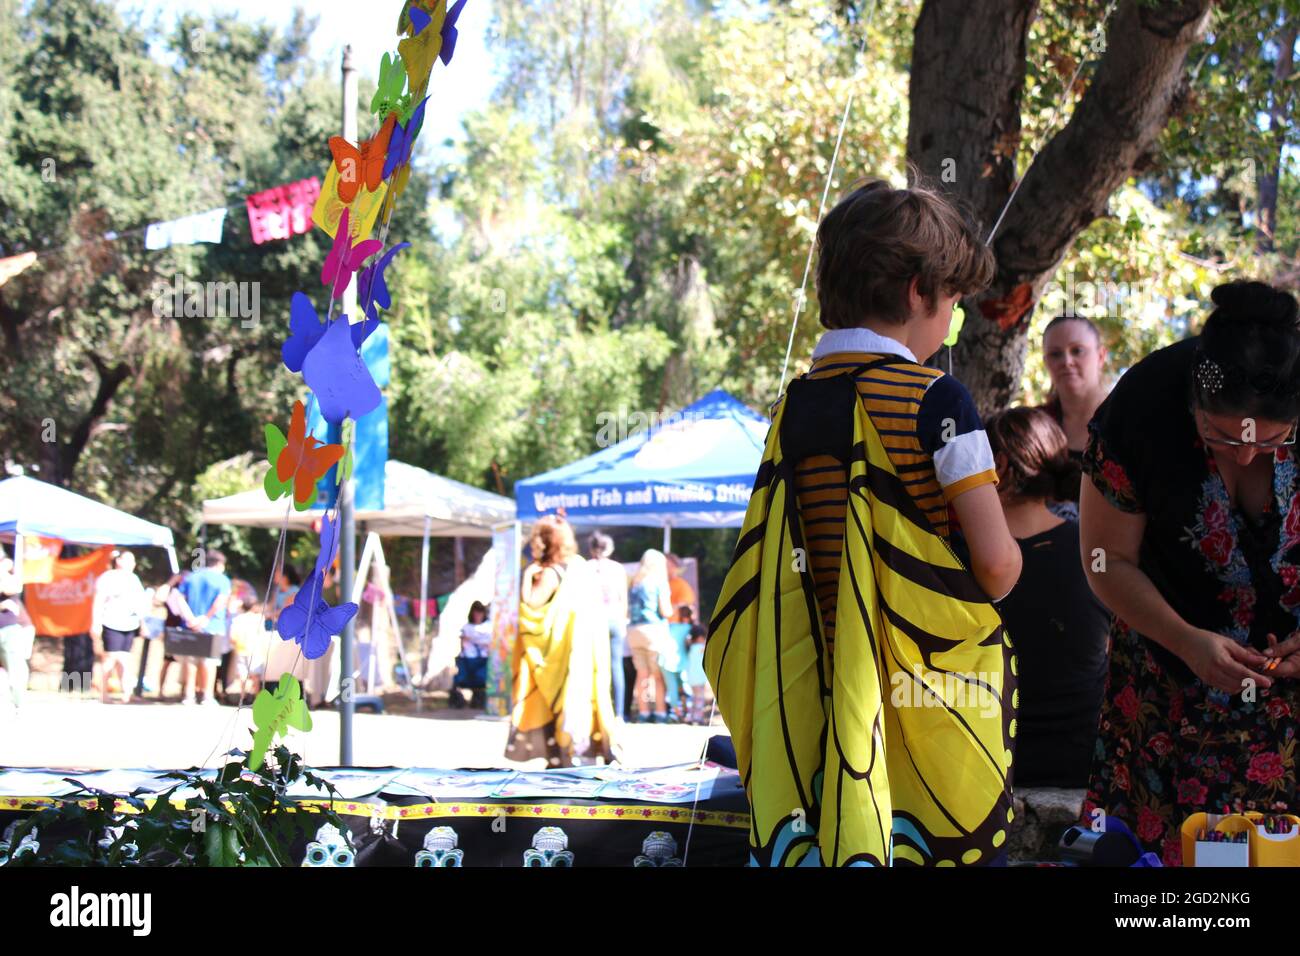 PASADENA, Calif. - A monarch festival with a Dia de los Muertos twist! At the Dia de los Muertos Monarch Butterfly Festival held in Pasadena on October 28, 2017, children and adults hang paper monarchs from a tree to represent past loved ones and overwintering monarchs. Stock Photo